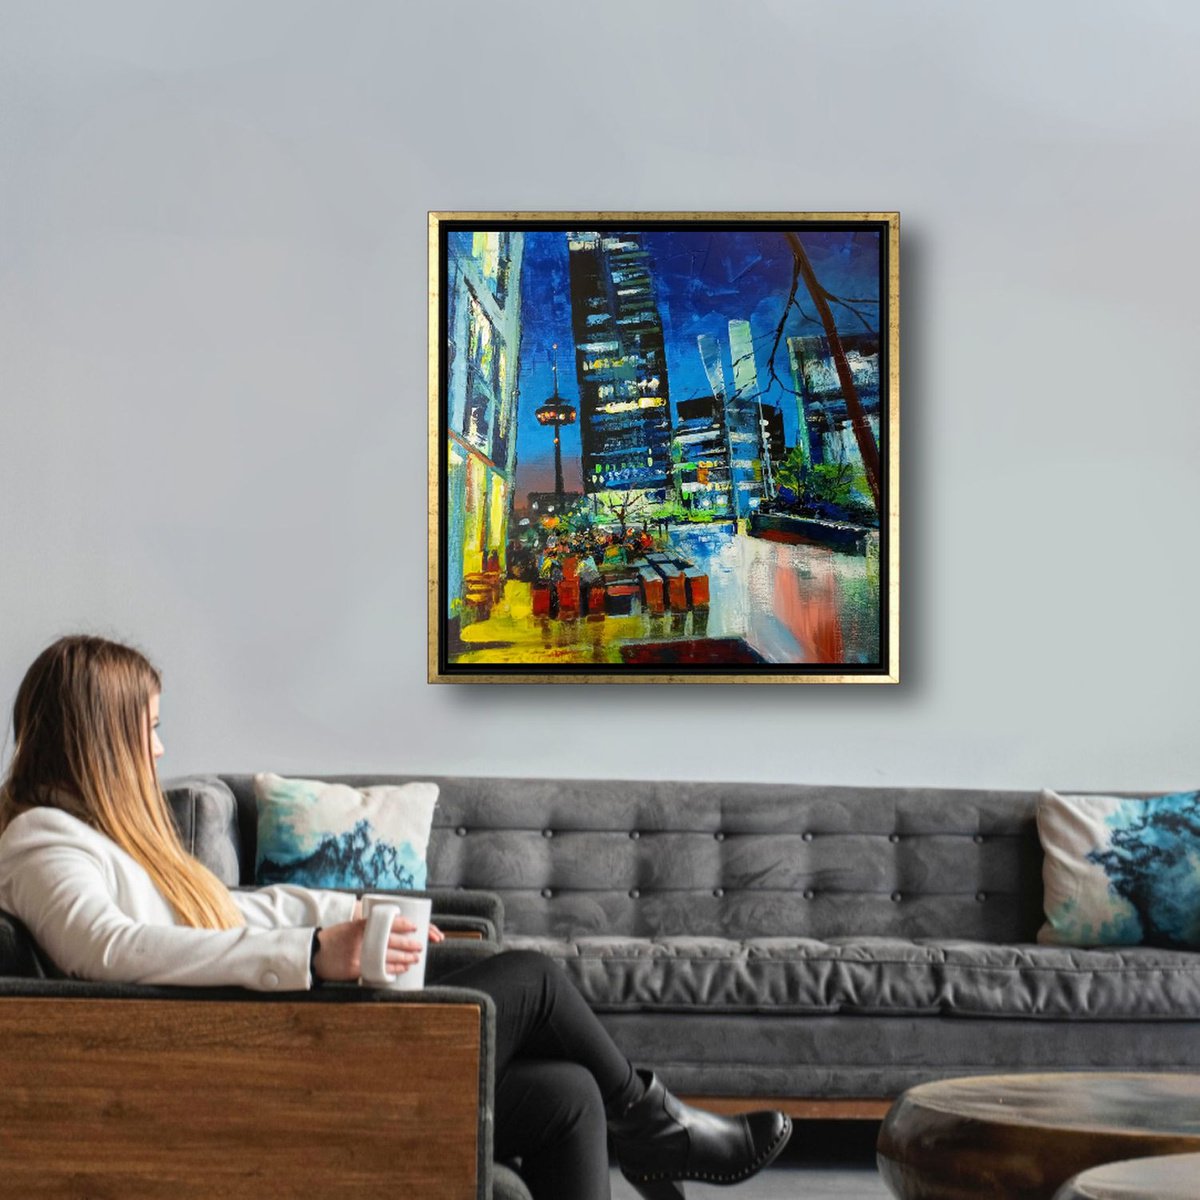 ’MEDIAPARK COLOGNE’ - Cityscape Square Acrylics Painting on Canvas by Ion Sheremet